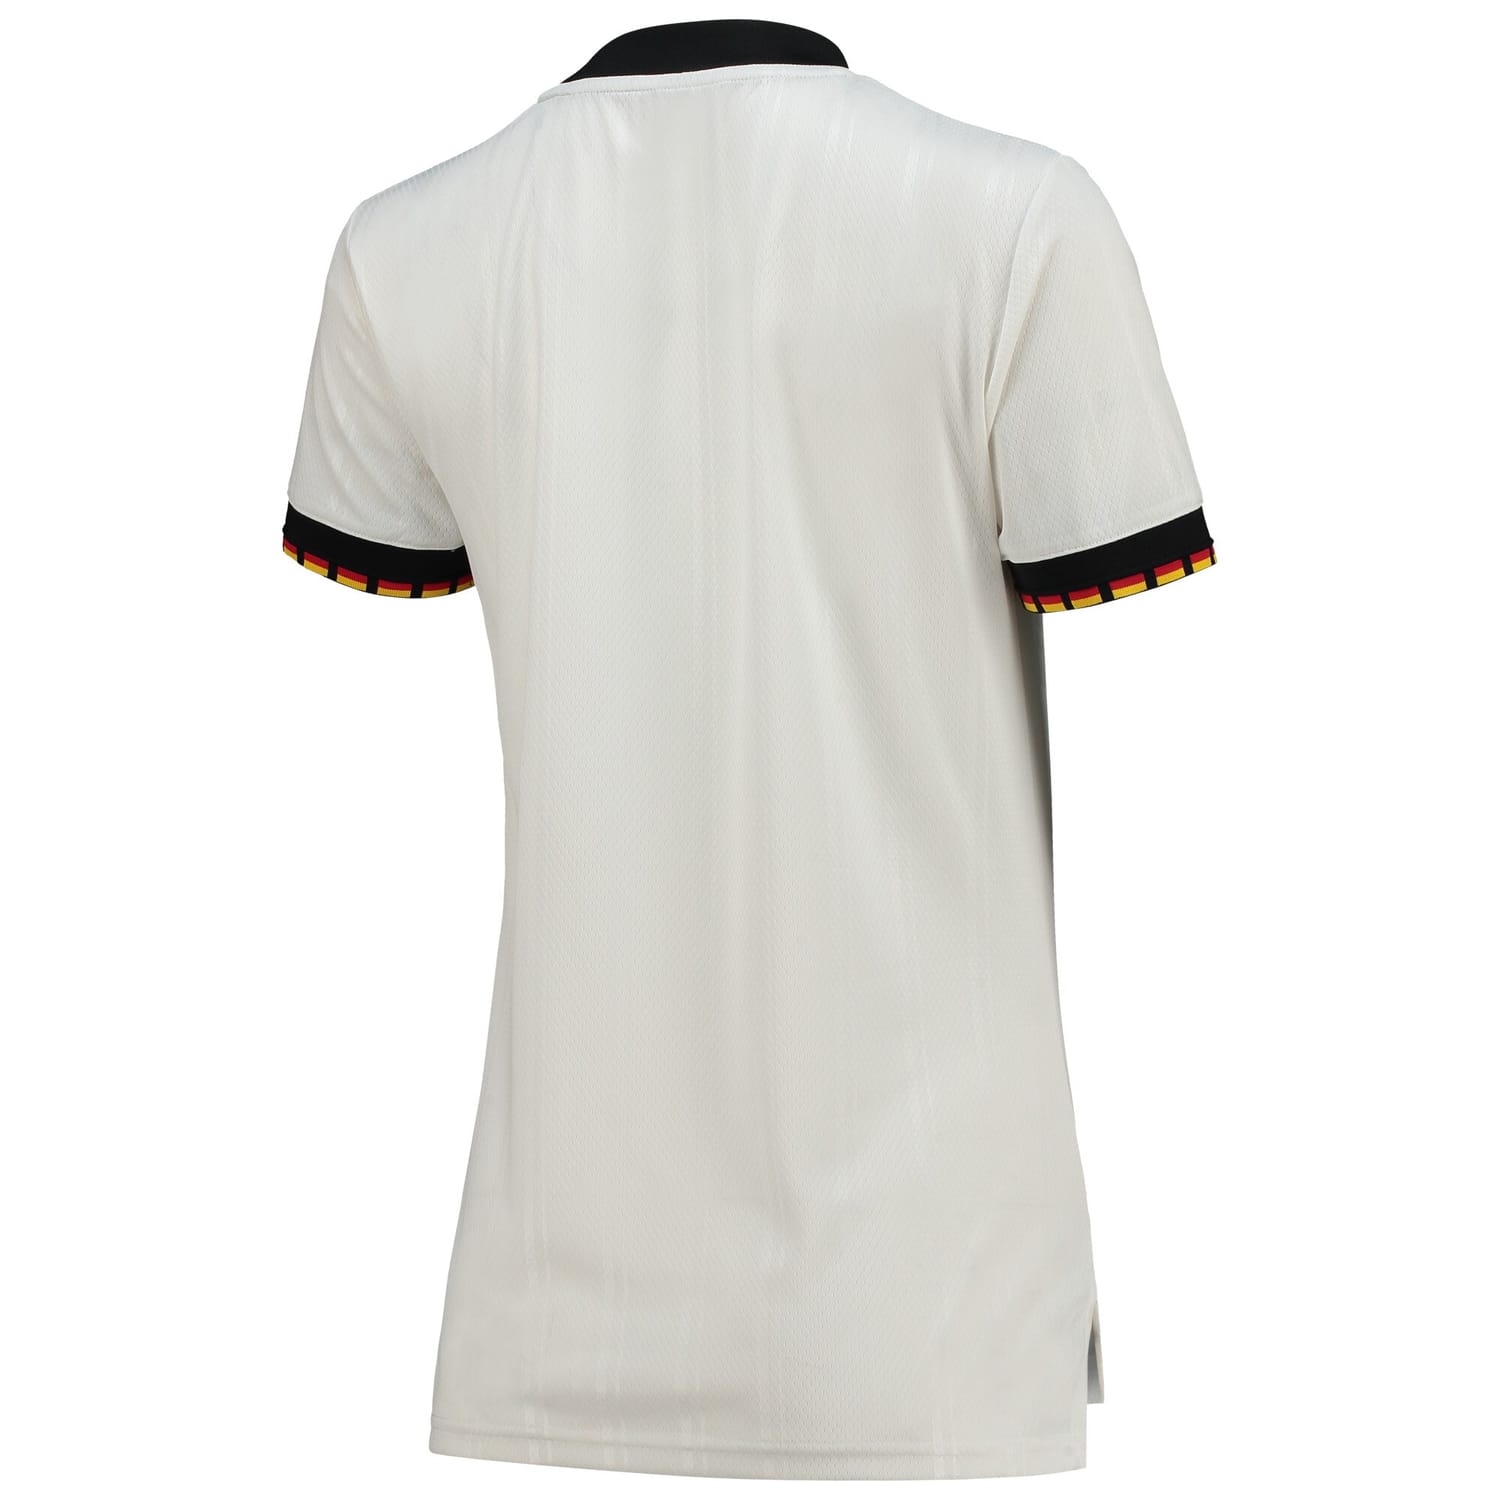 Germany National Team Jersey Shirt White 2022 for Women